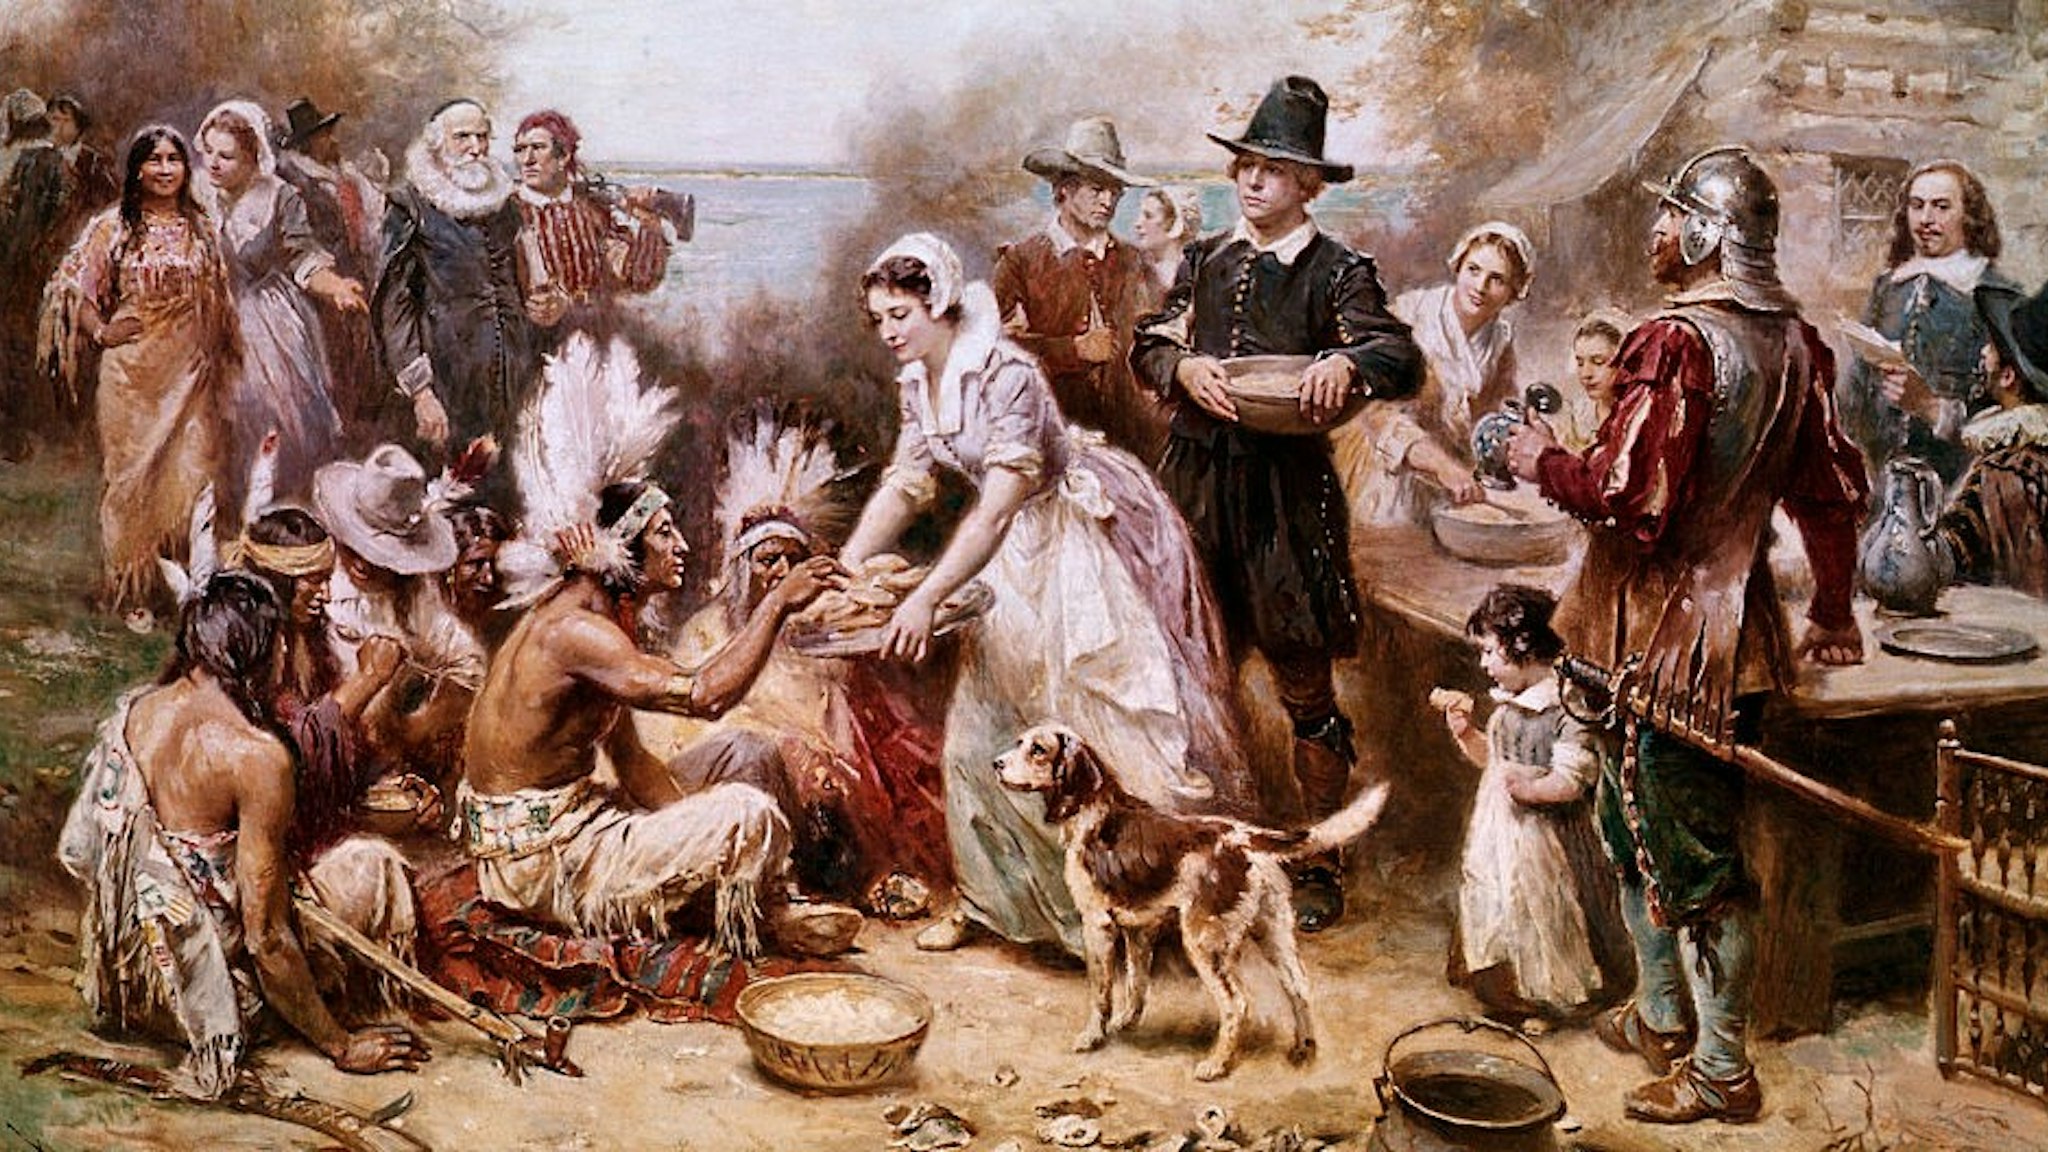 (Original Caption) Painting by J.L.M. Ferris of the first Thanksgiving ceremony with Native Americans and the Pilgrims in 1621. Undated illustration.